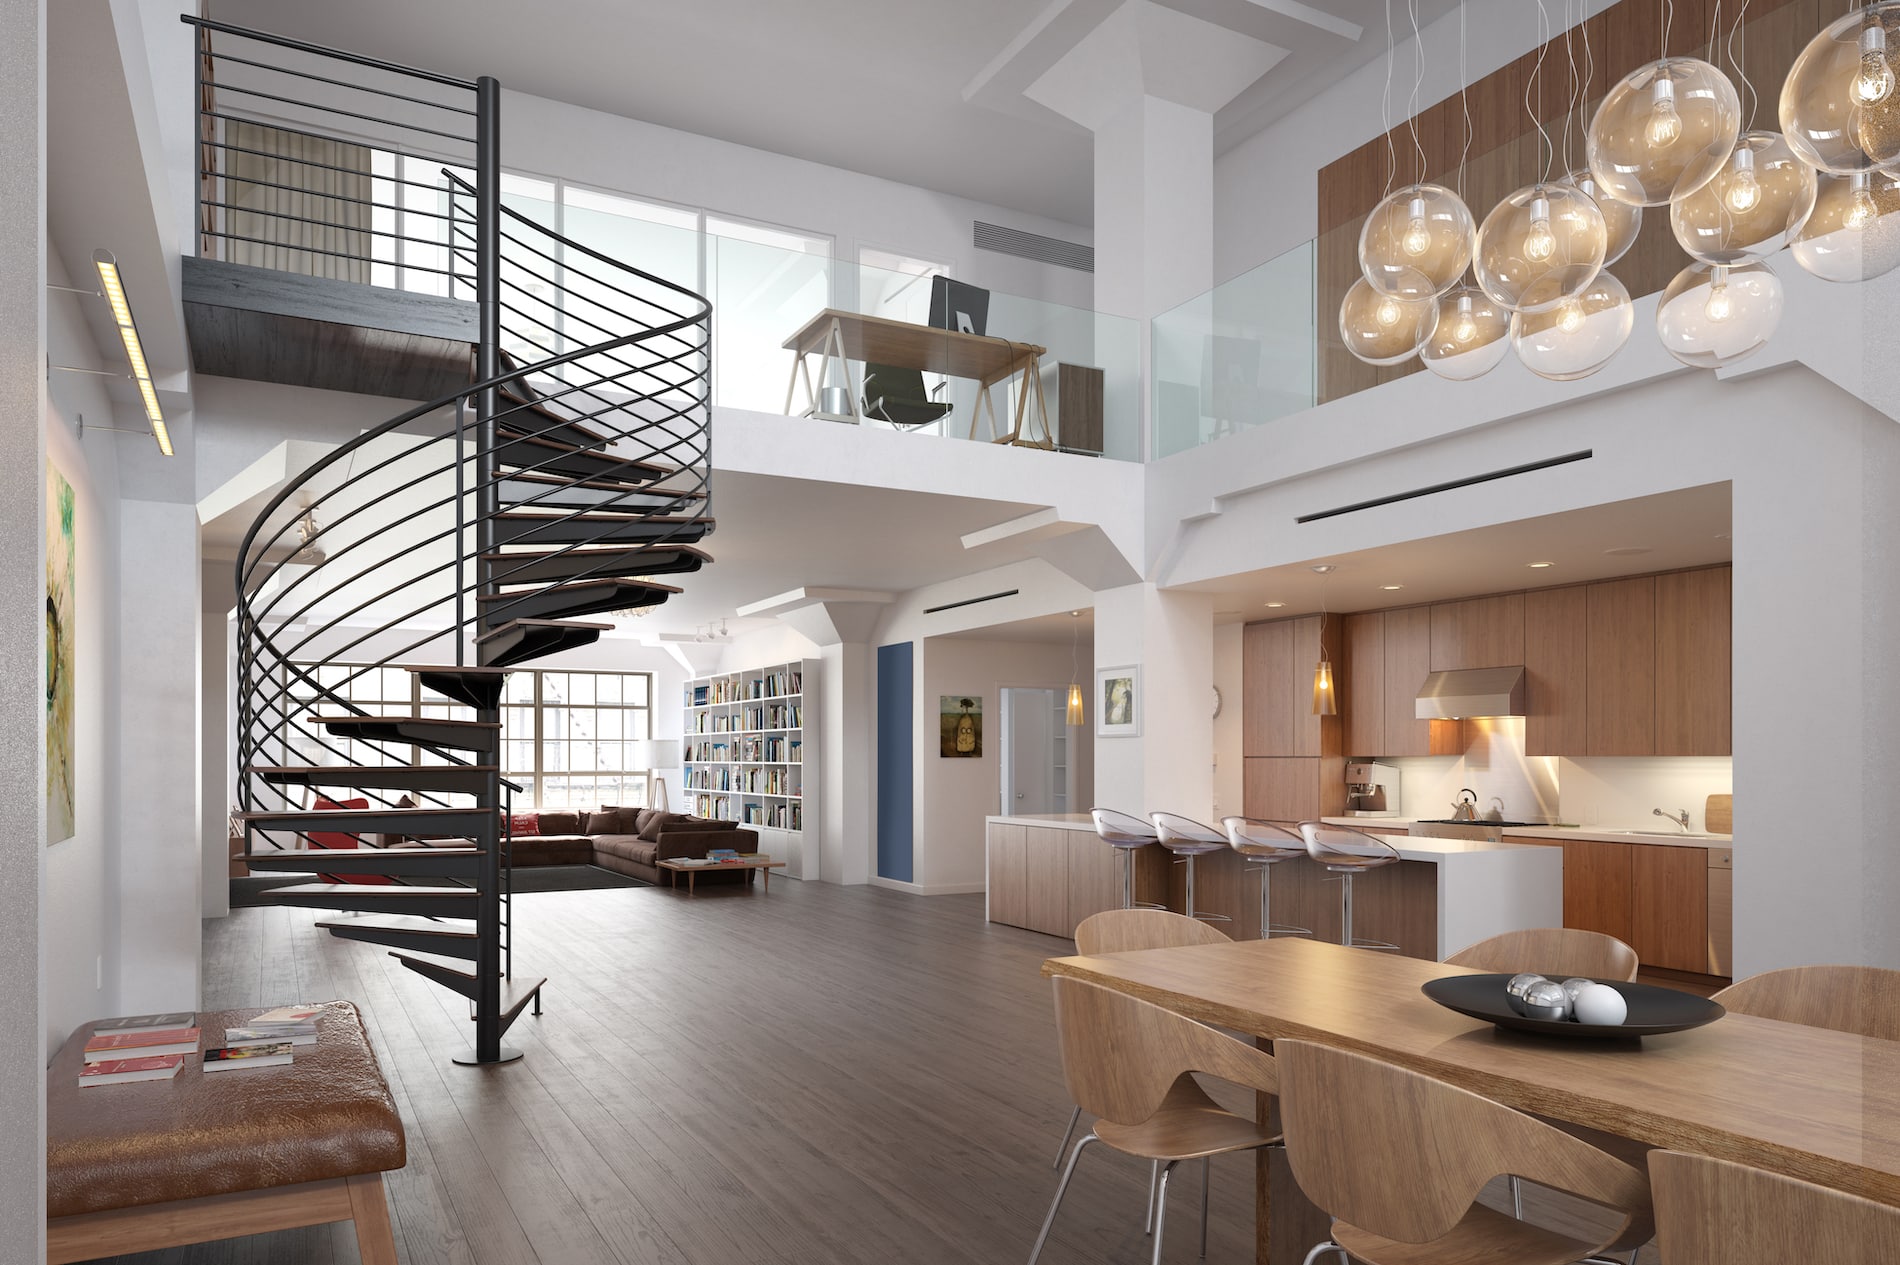 An open-concept home with furniture, a staircase, and work-oriented loft space ideas.